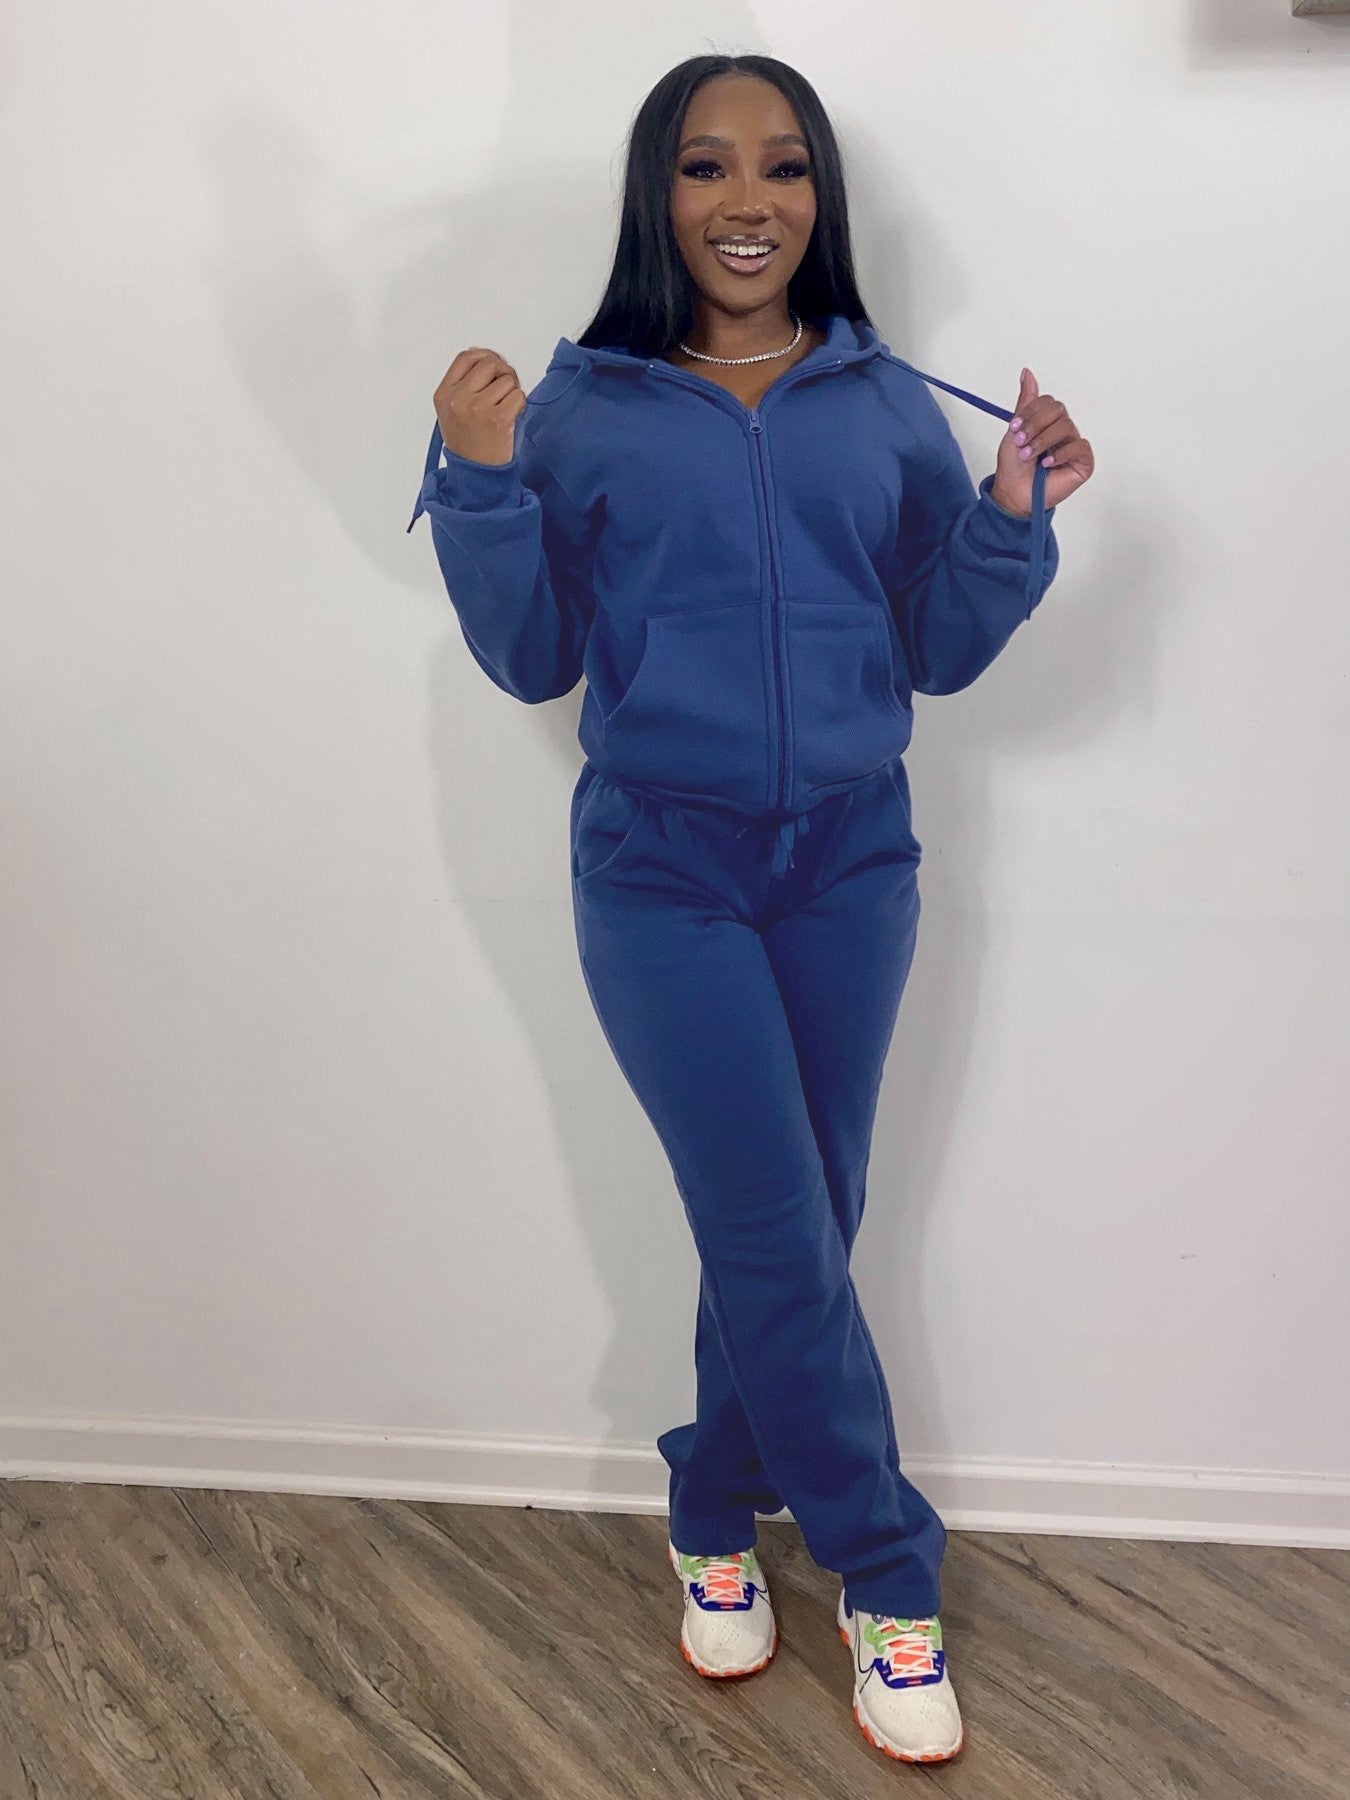 Solid Color Two Piece Sweatsuit w/Hood